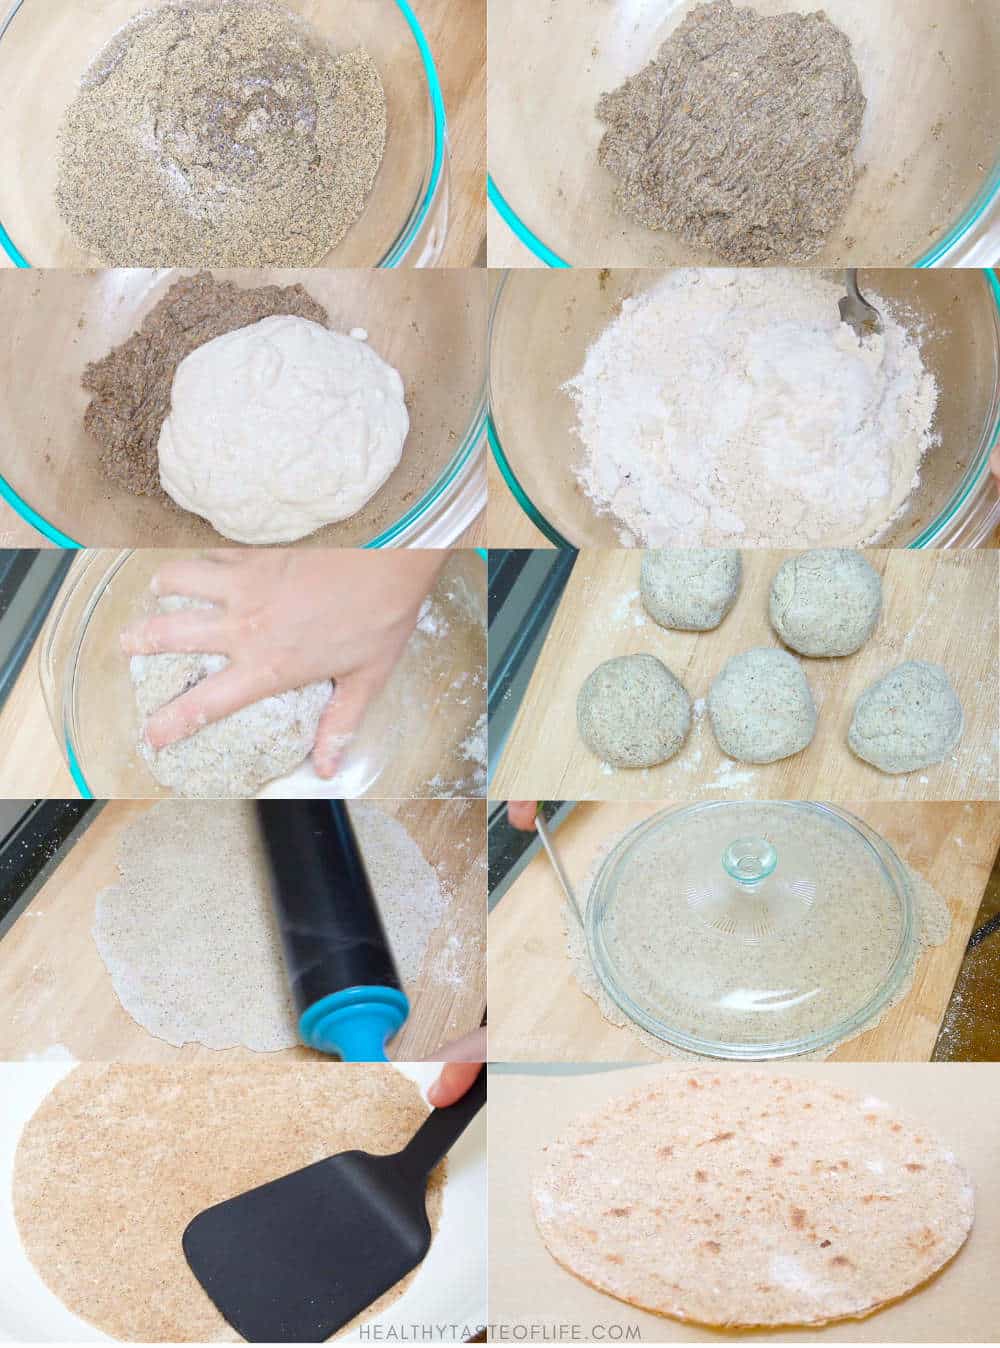 Process shots showing how to make healthy gluten free tortillas with sourdough flax seeds and gluten free brown rice flour.